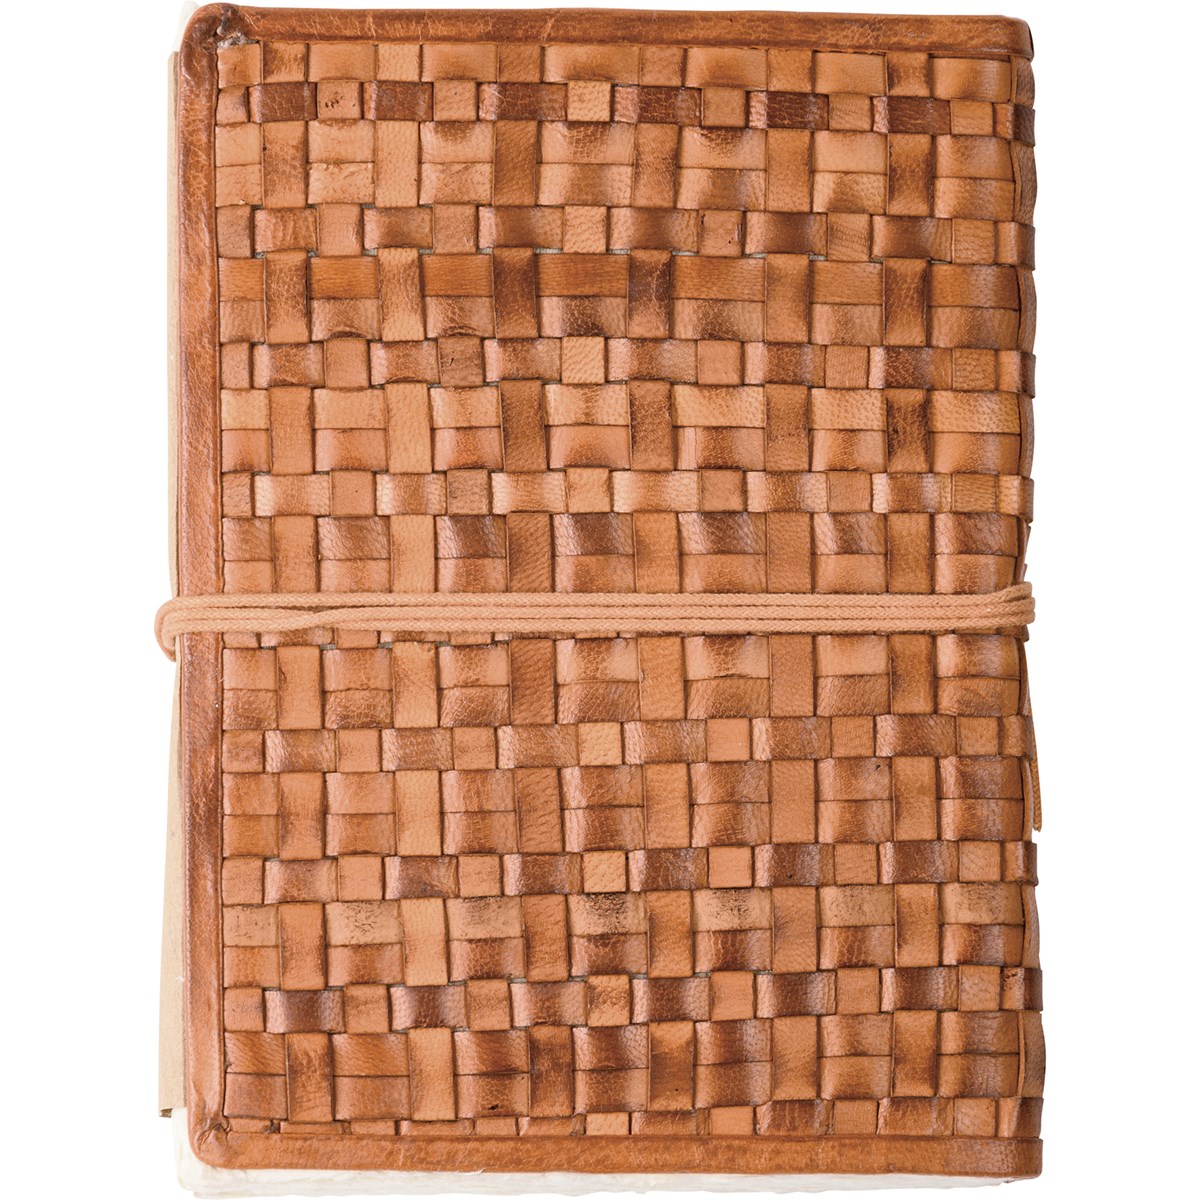 Woven Leather Journal - Leather, Paper